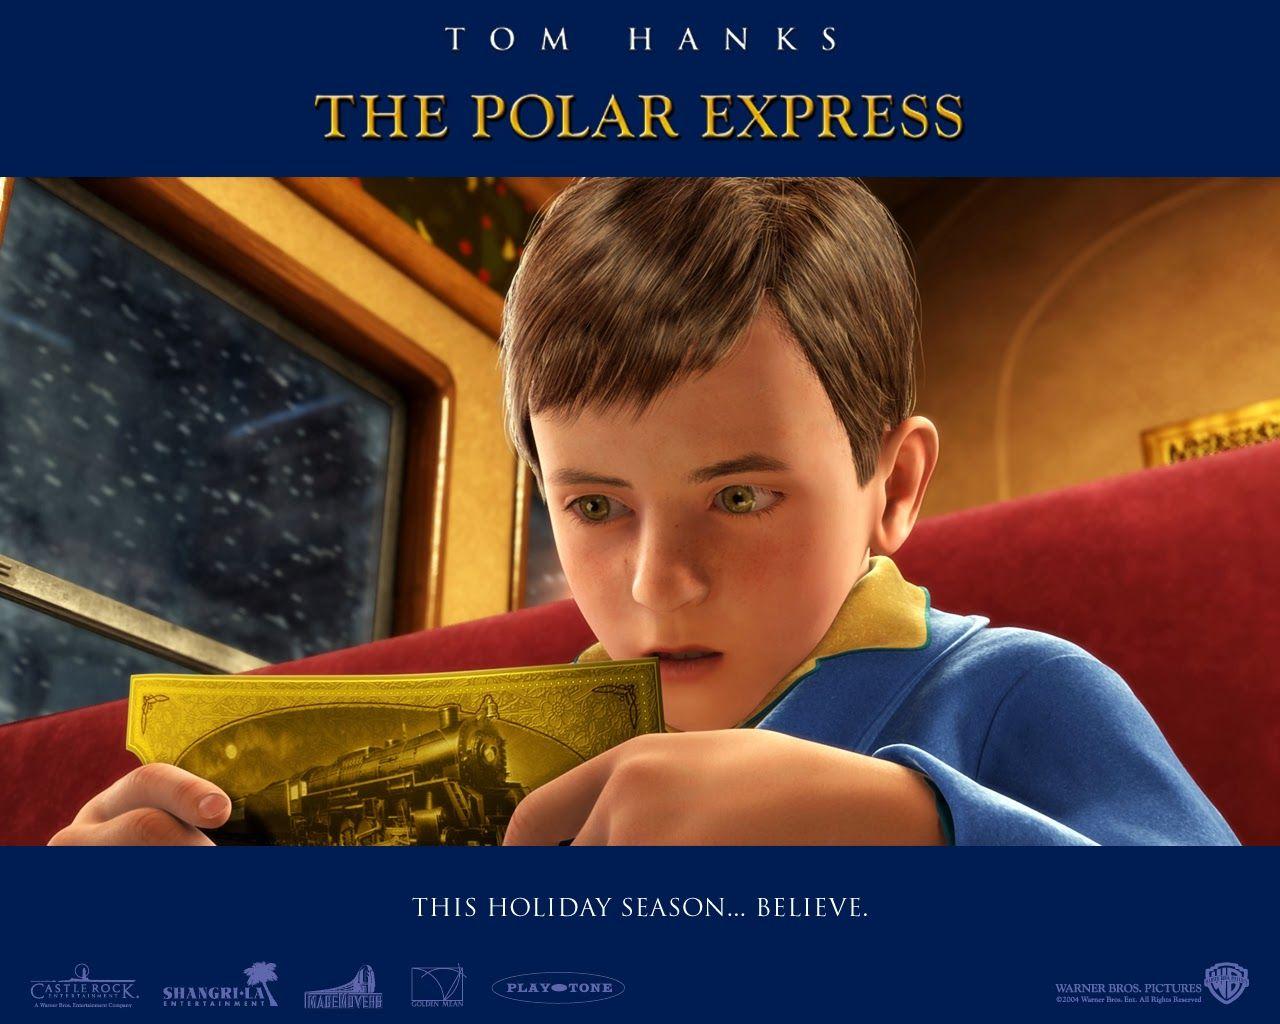 Wide Open Spaces: All Aboard The Polar Express